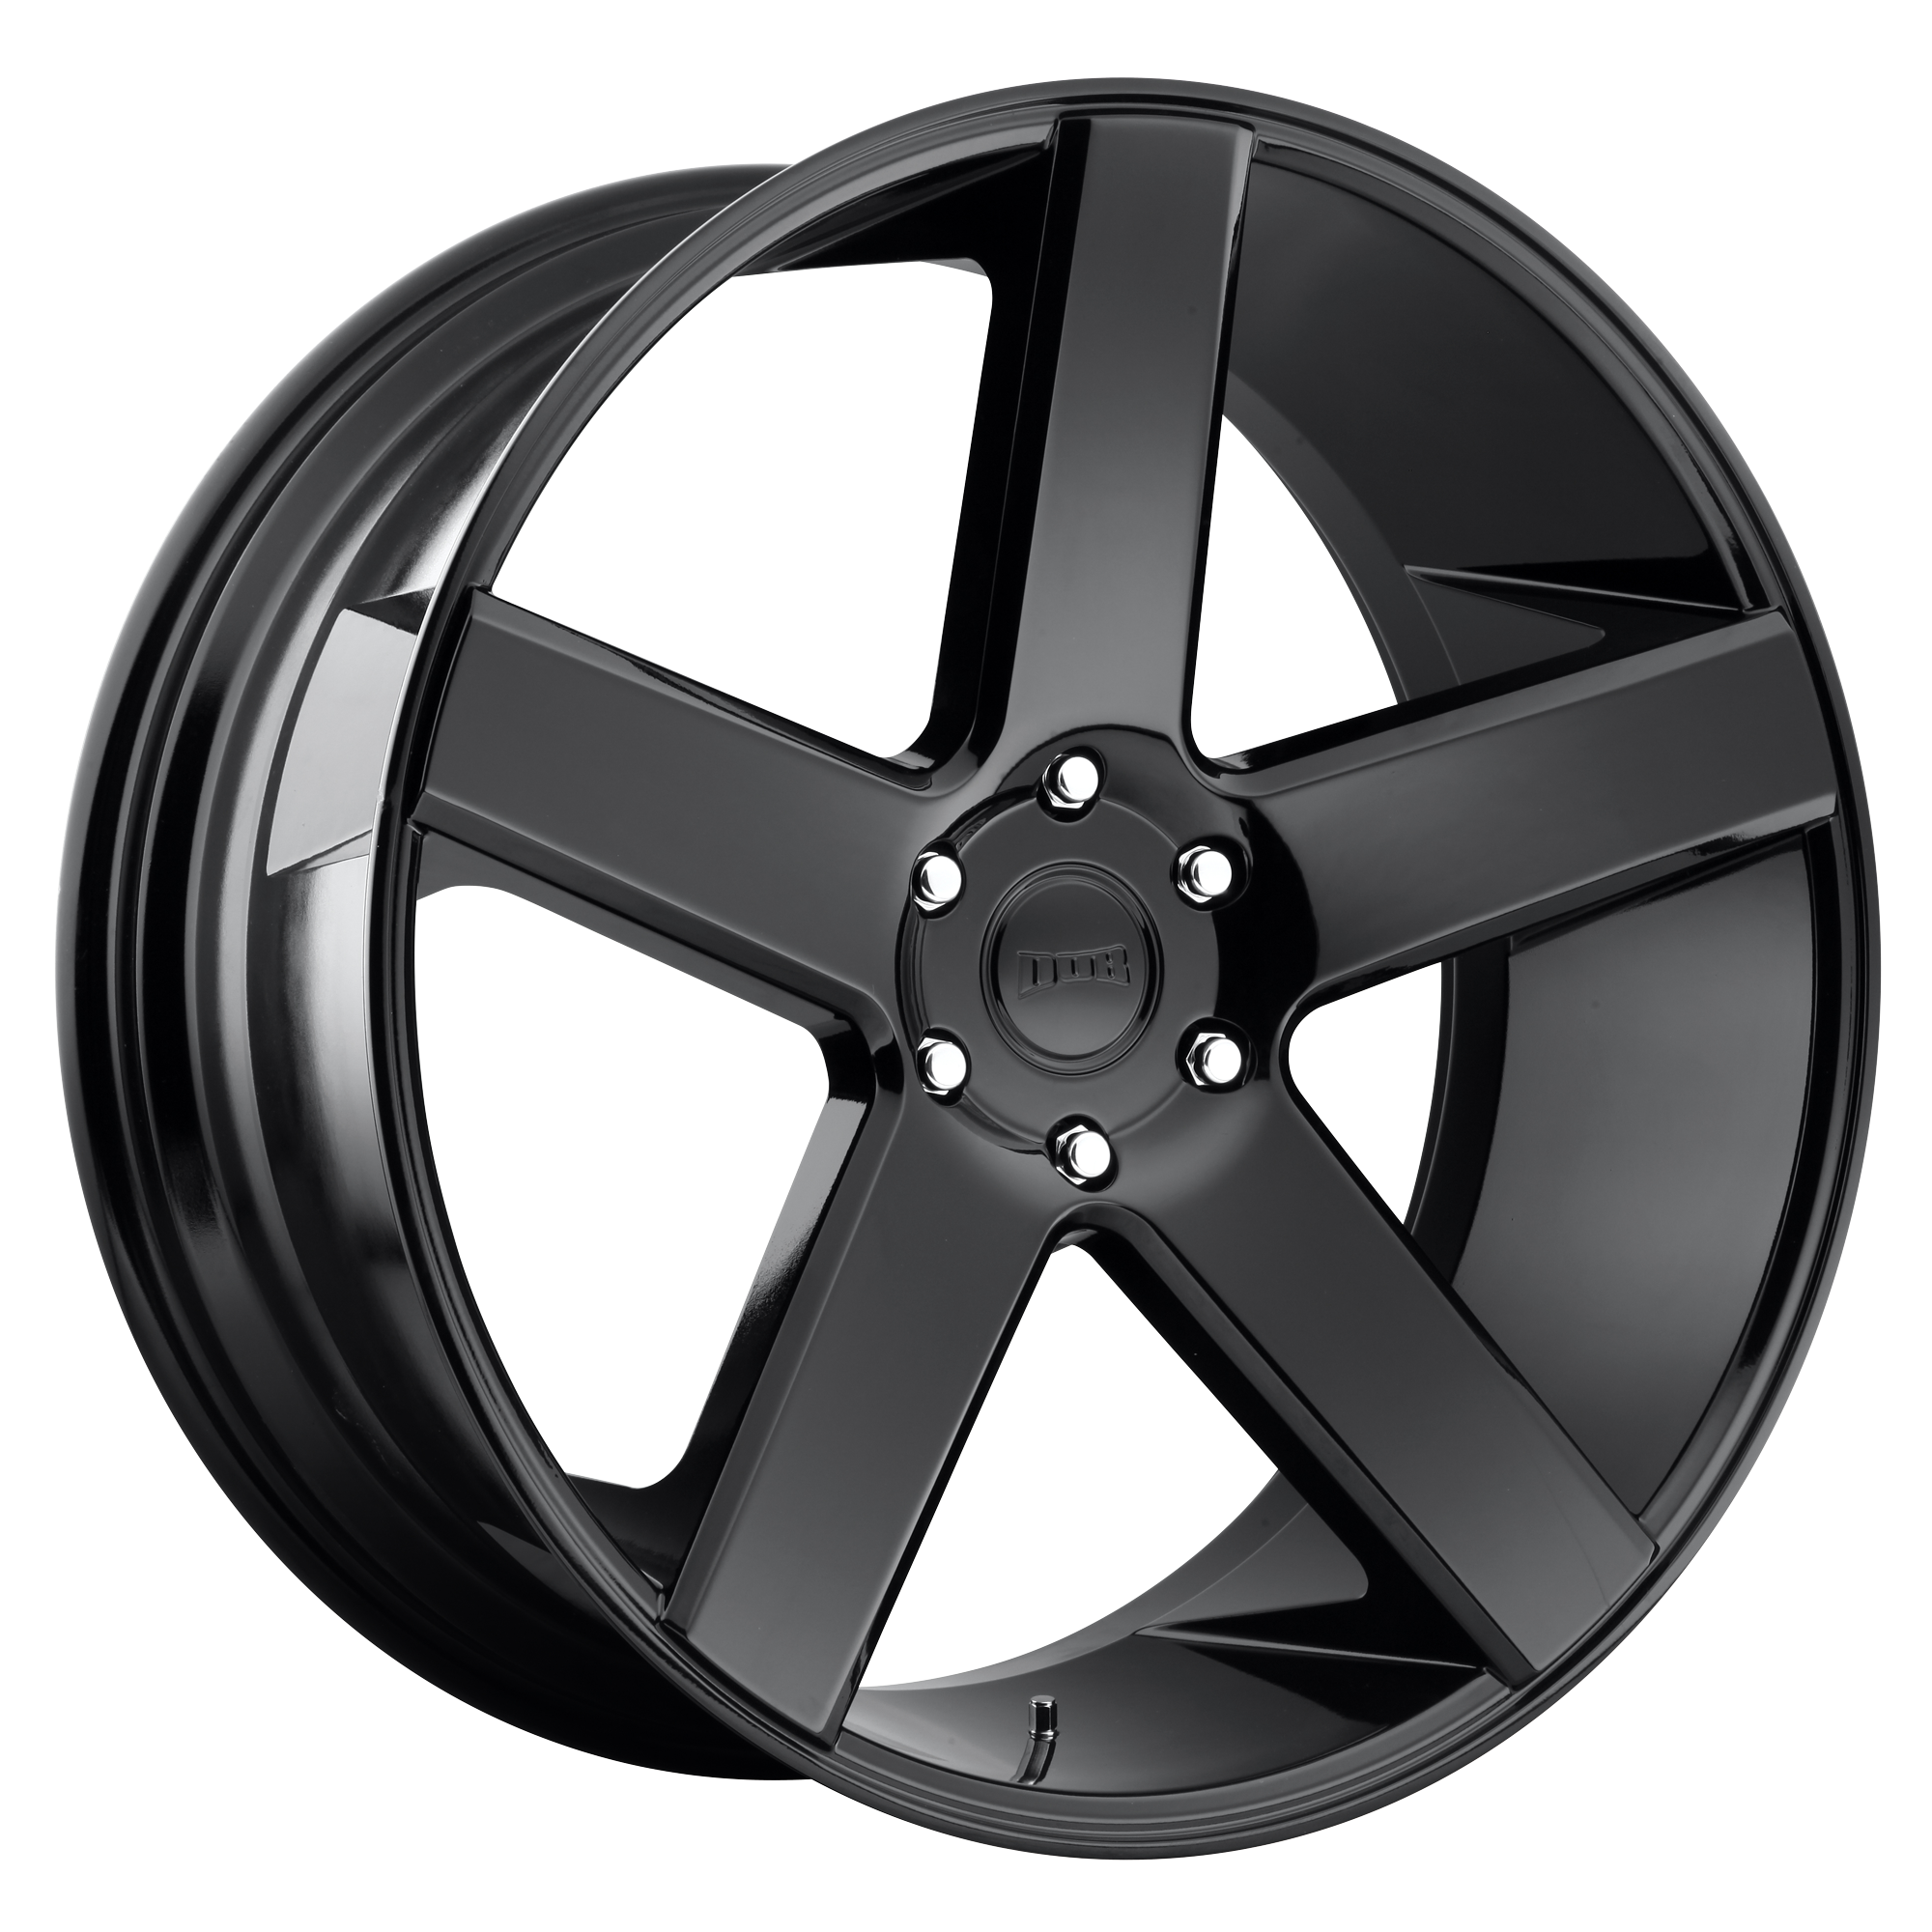 BALLER 22x9.5 5x127.00 GLOSS BLACK (11 mm) - Tires and Engine Performance